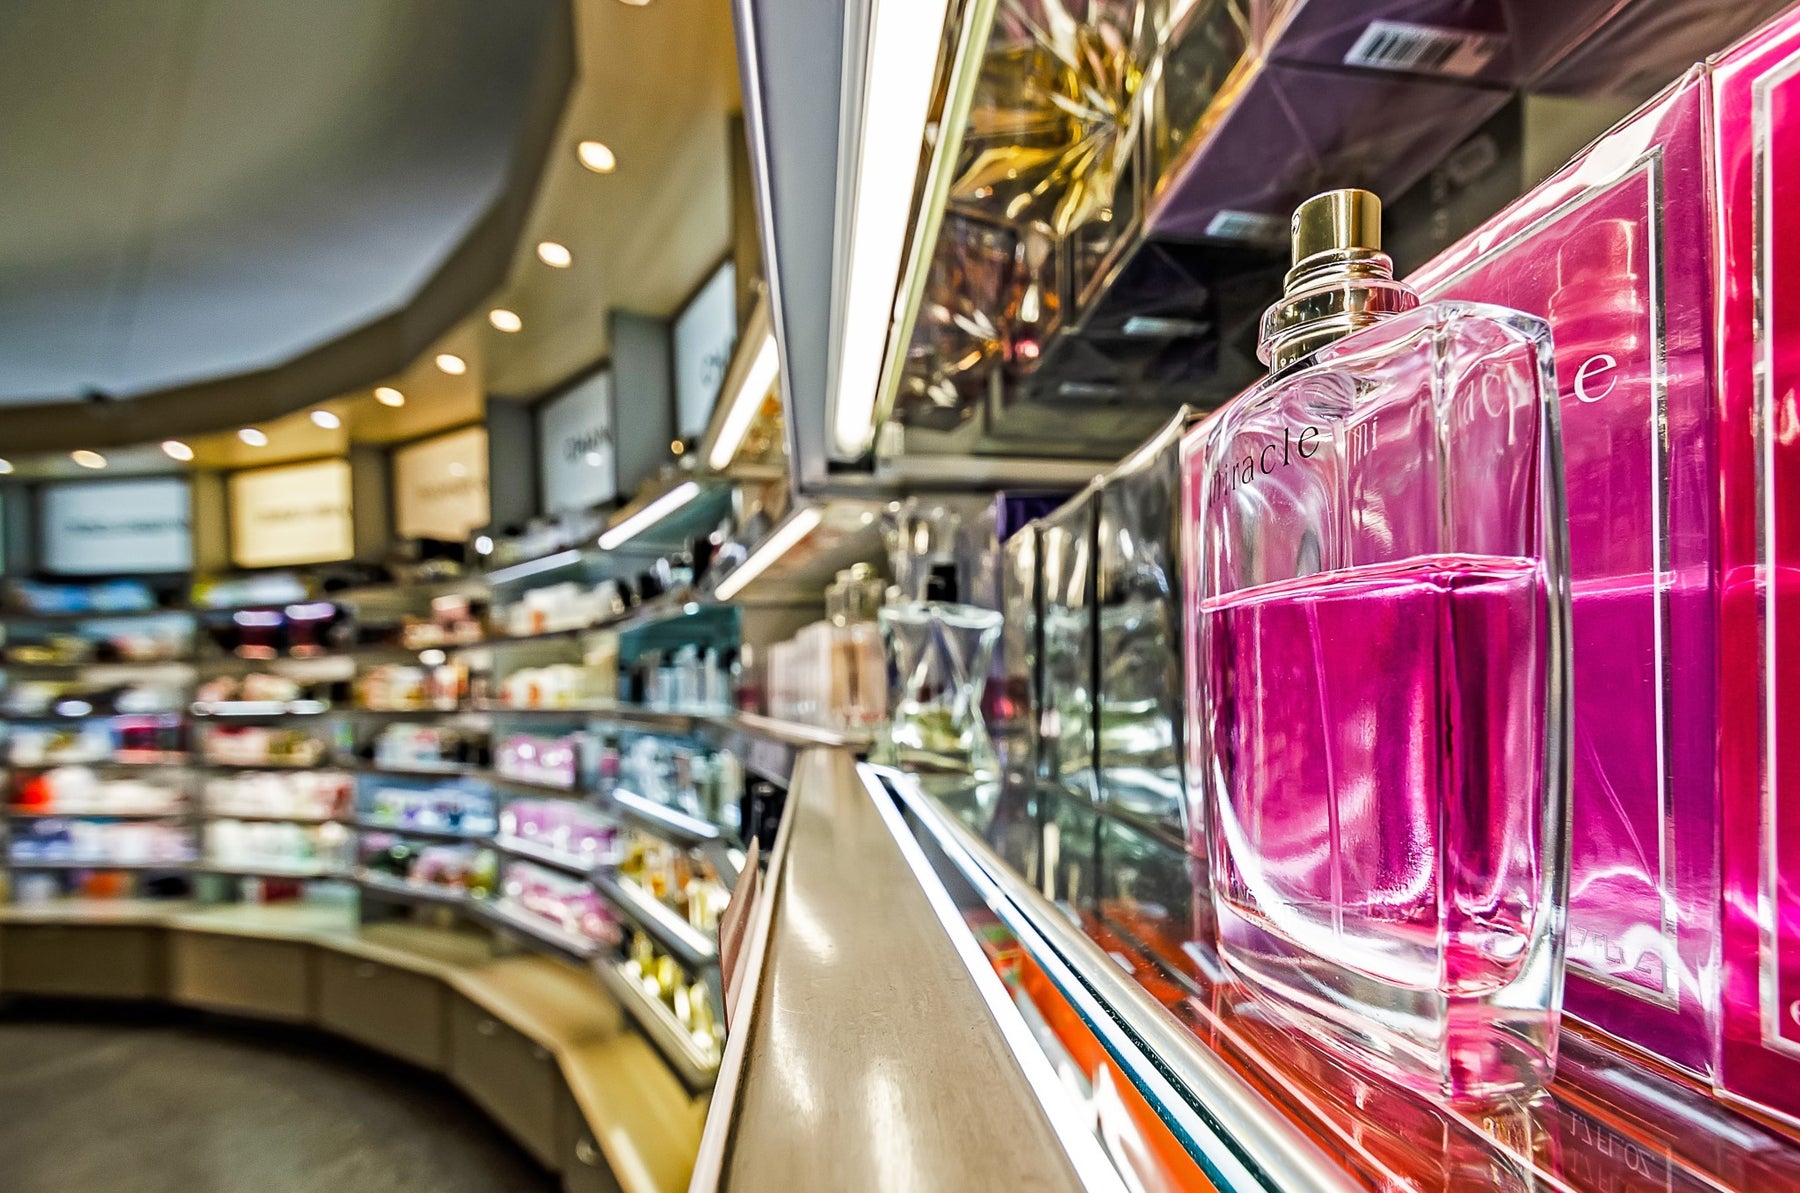 How to Shop for Perfume, According to Fragrance Experts